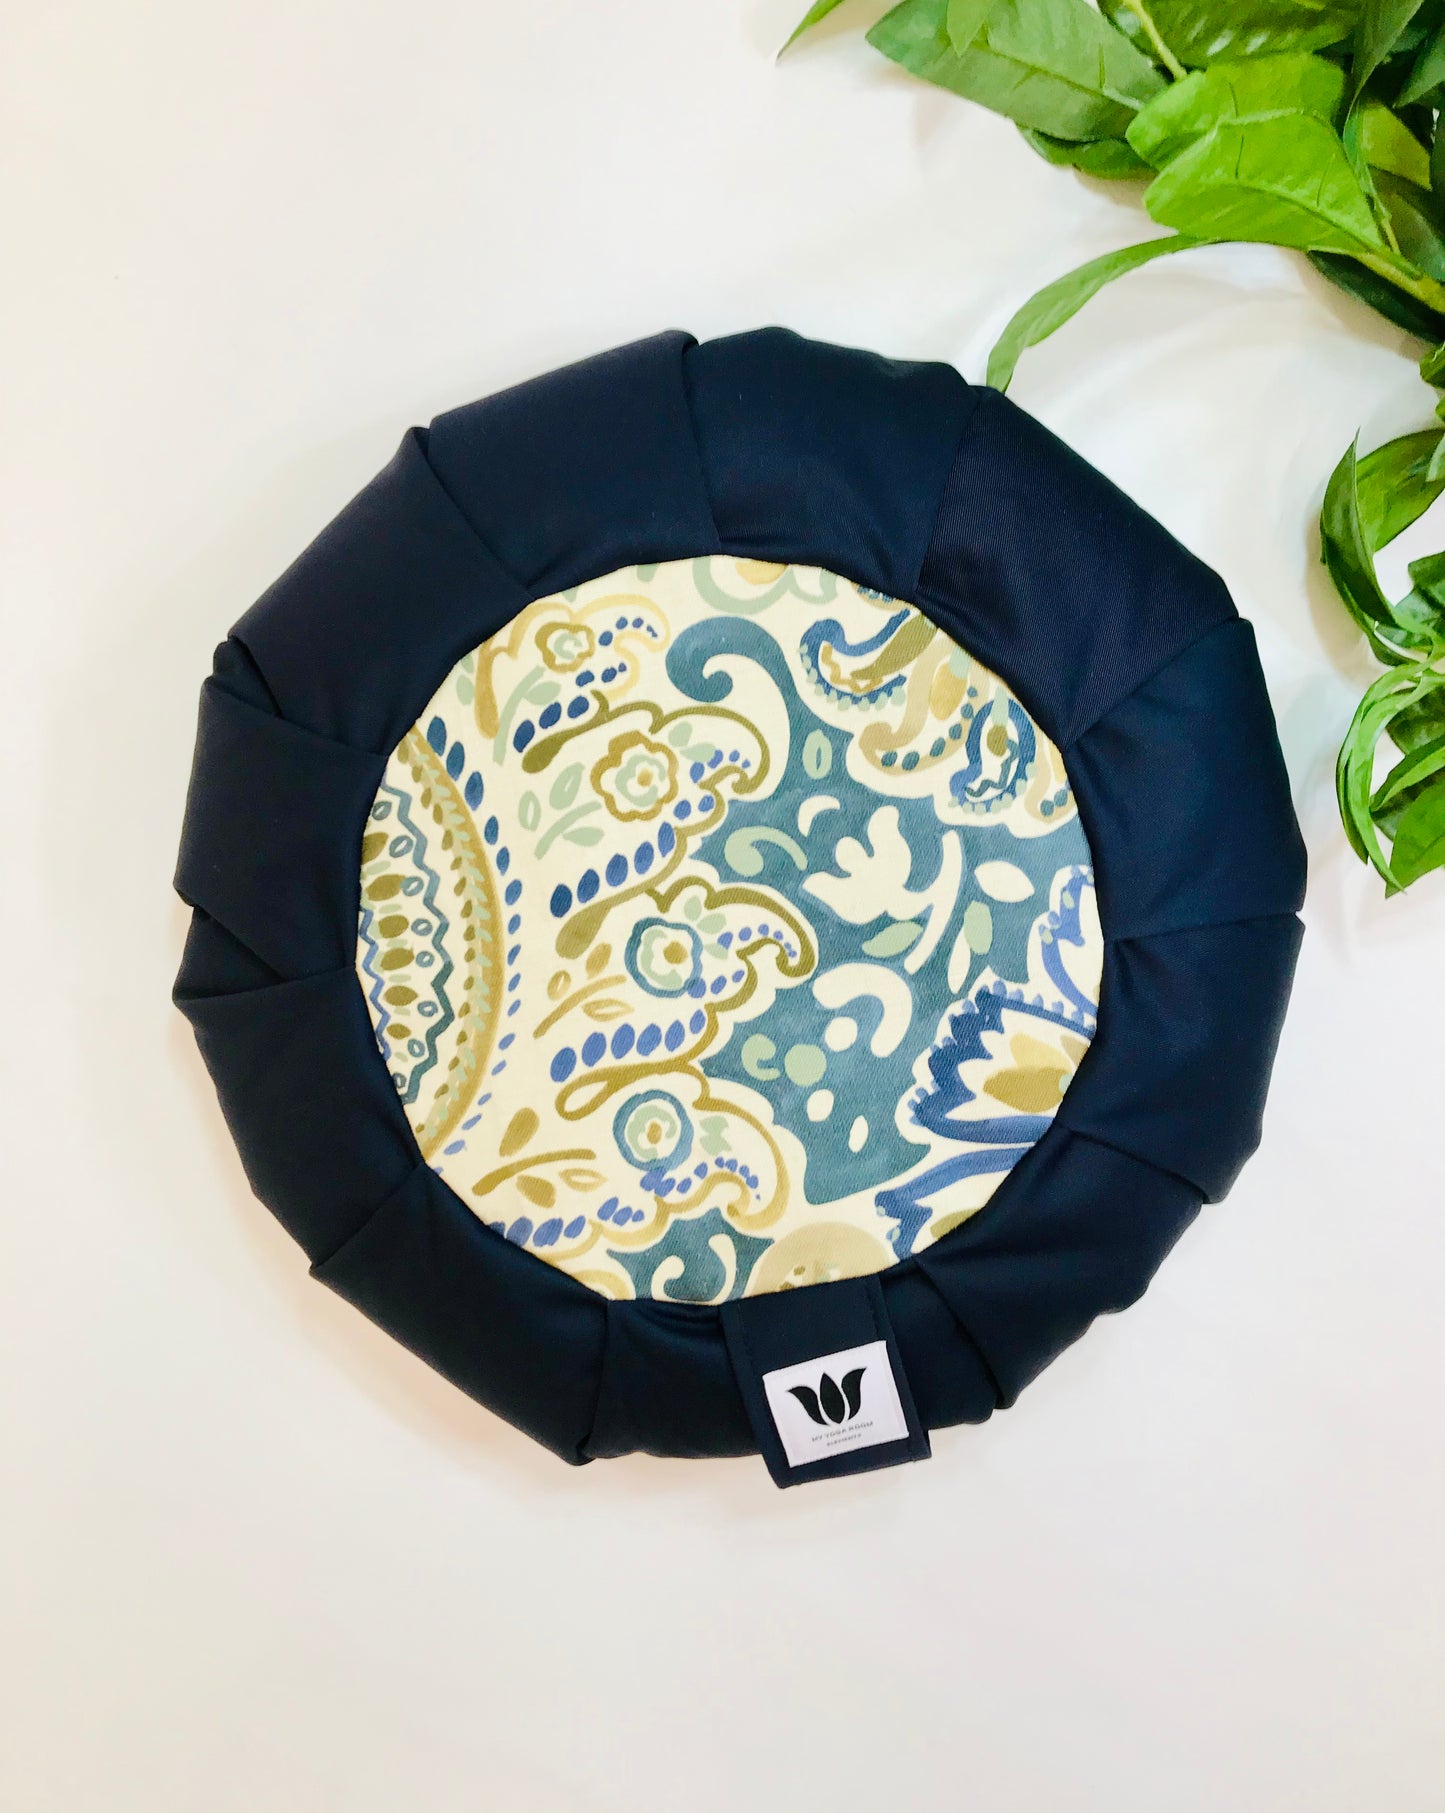 Handcrafted premium cotton canvas fabric meditation seat cushion in shades navy blue and blue, green, yellow modern graphic printfabric. Align the spine and body in comfort to calm the monkey mind in your meditation practice. Handcrafted in Calgary, Alberta Canada